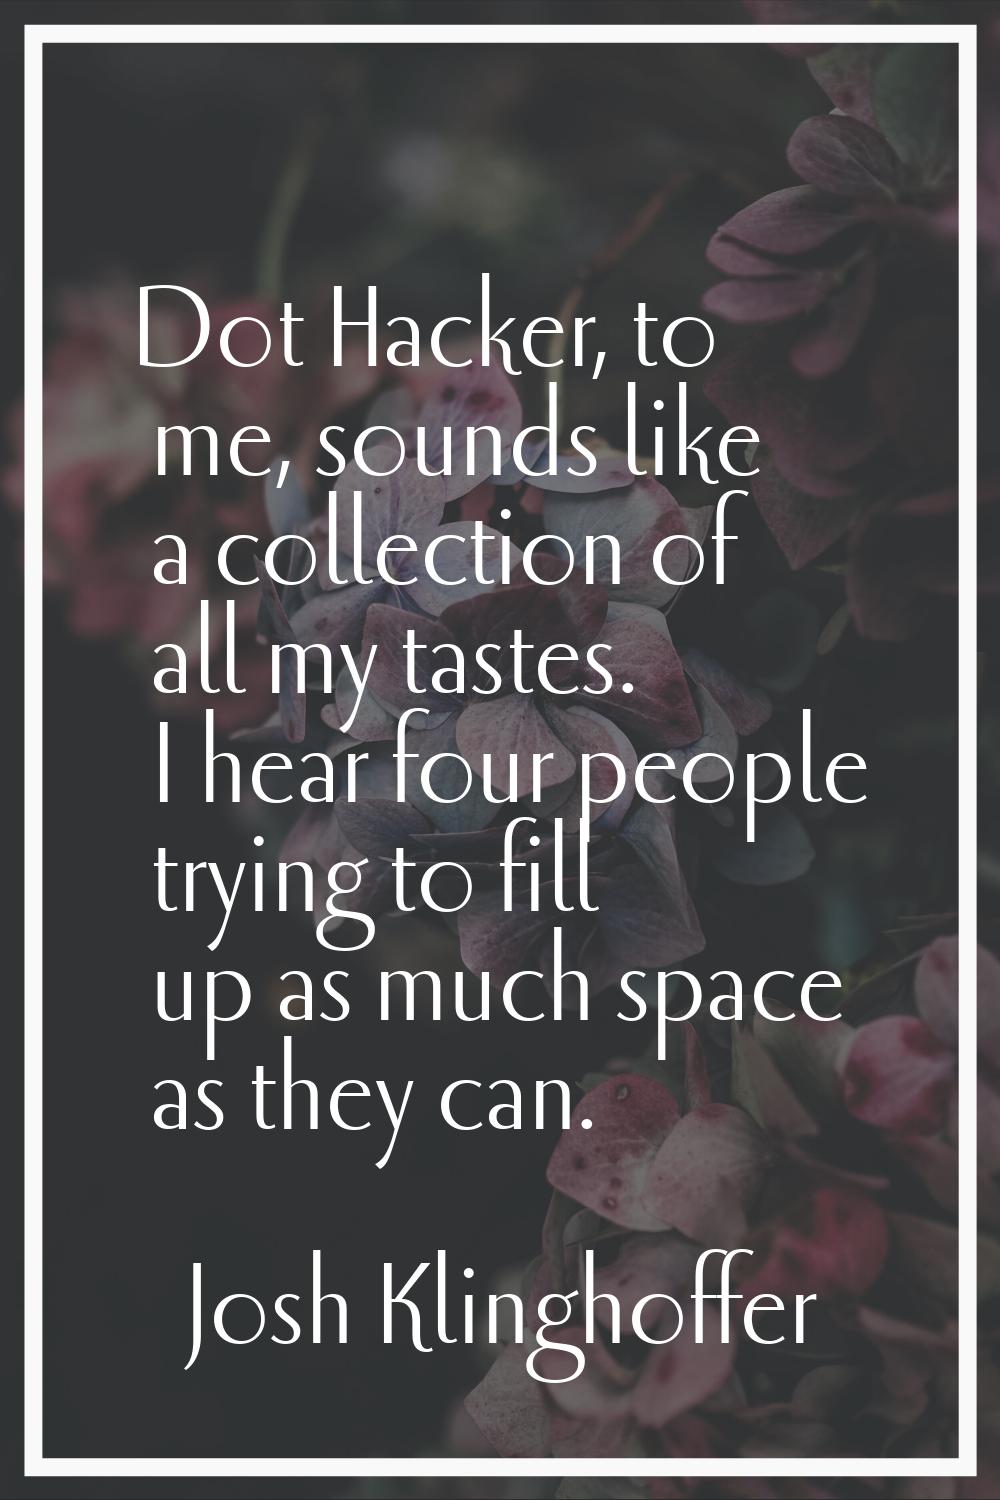 Dot Hacker, to me, sounds like a collection of all my tastes. I hear four people trying to fill up 